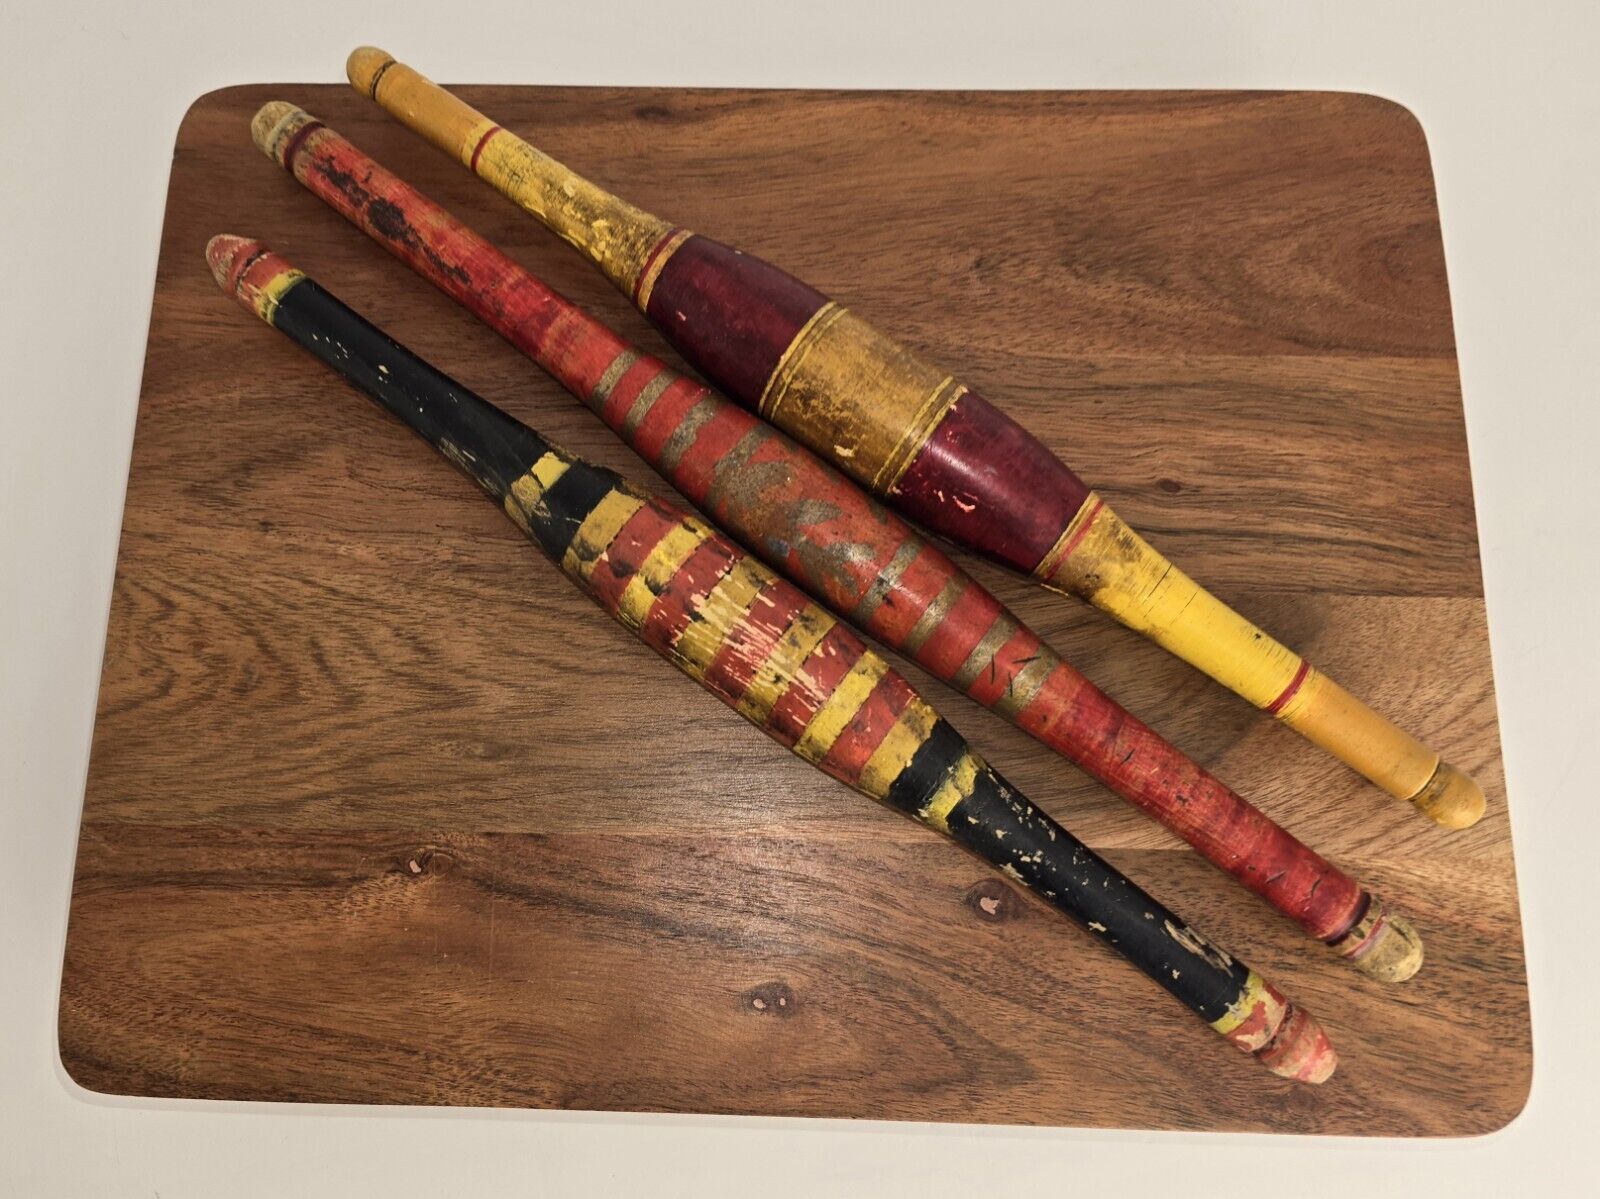 Vintage Wooden Lacquer Painted Bread Rolling Pin Chapati Roller 3 Pc